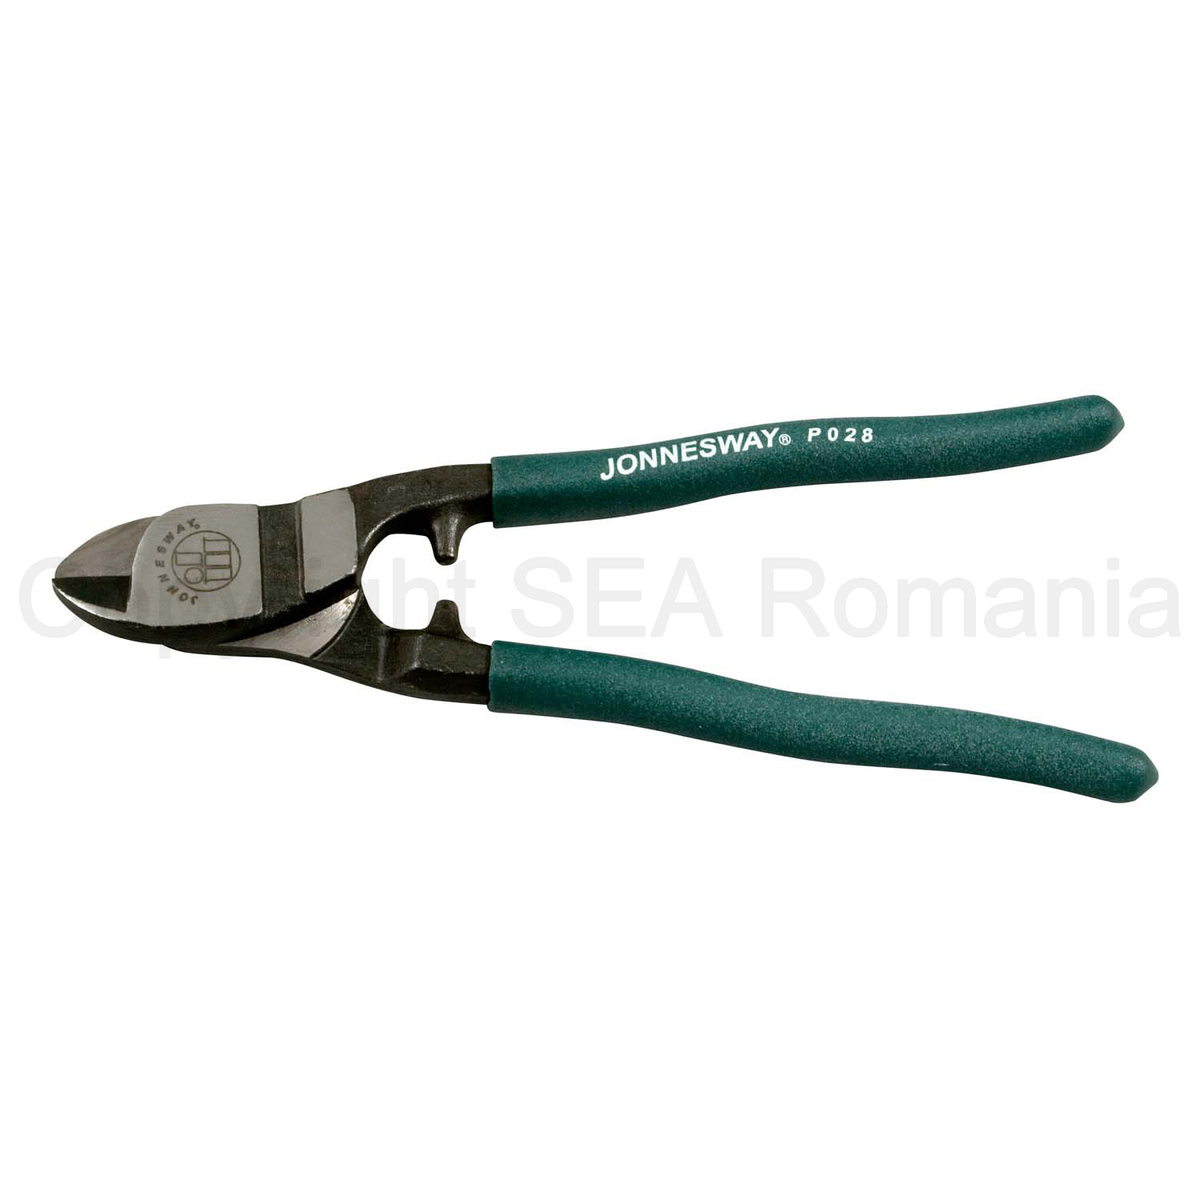 8" PATENTED WIRE CUTTERS GERMAN PATENT NO. M94028540 P028